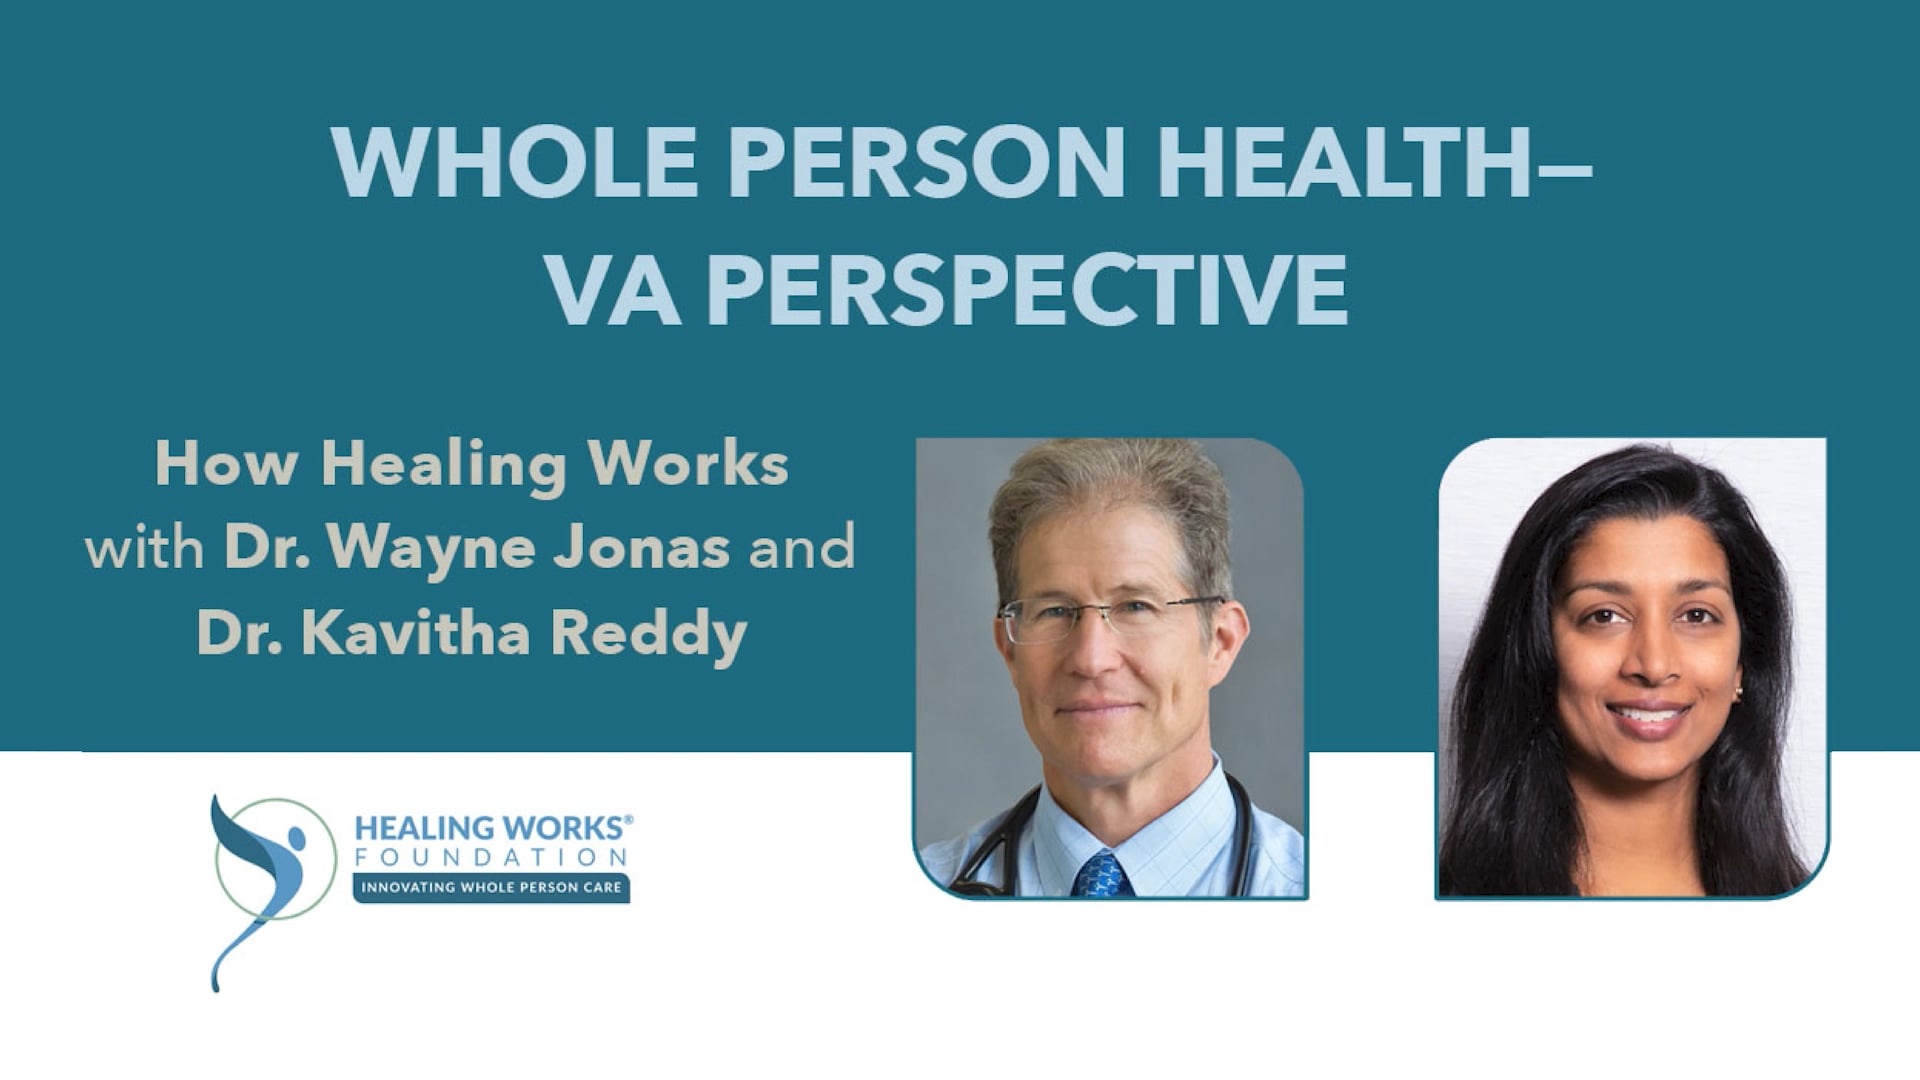 Interview with Dr. Kavitha Reddy (Whole Person Health-VA Perspective)